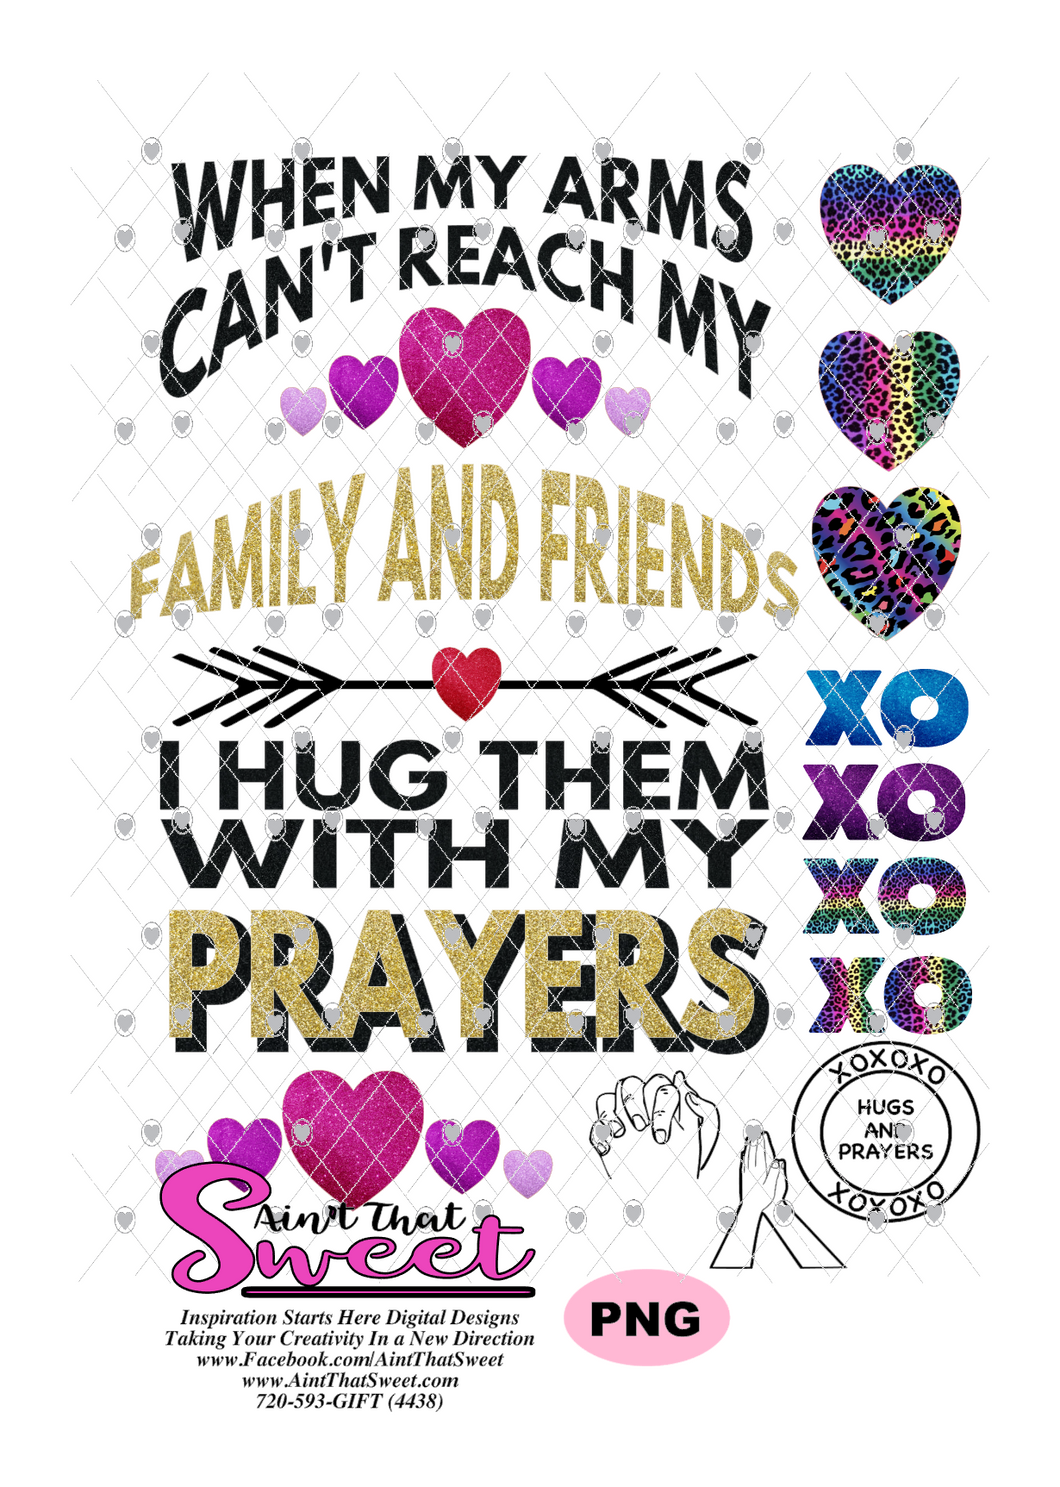 When My Arms Can't Reach My Family and Friends I Hug Them With My Prayers - 1 PNG Only (1 File) - Sublimation, Printing, Waterslide